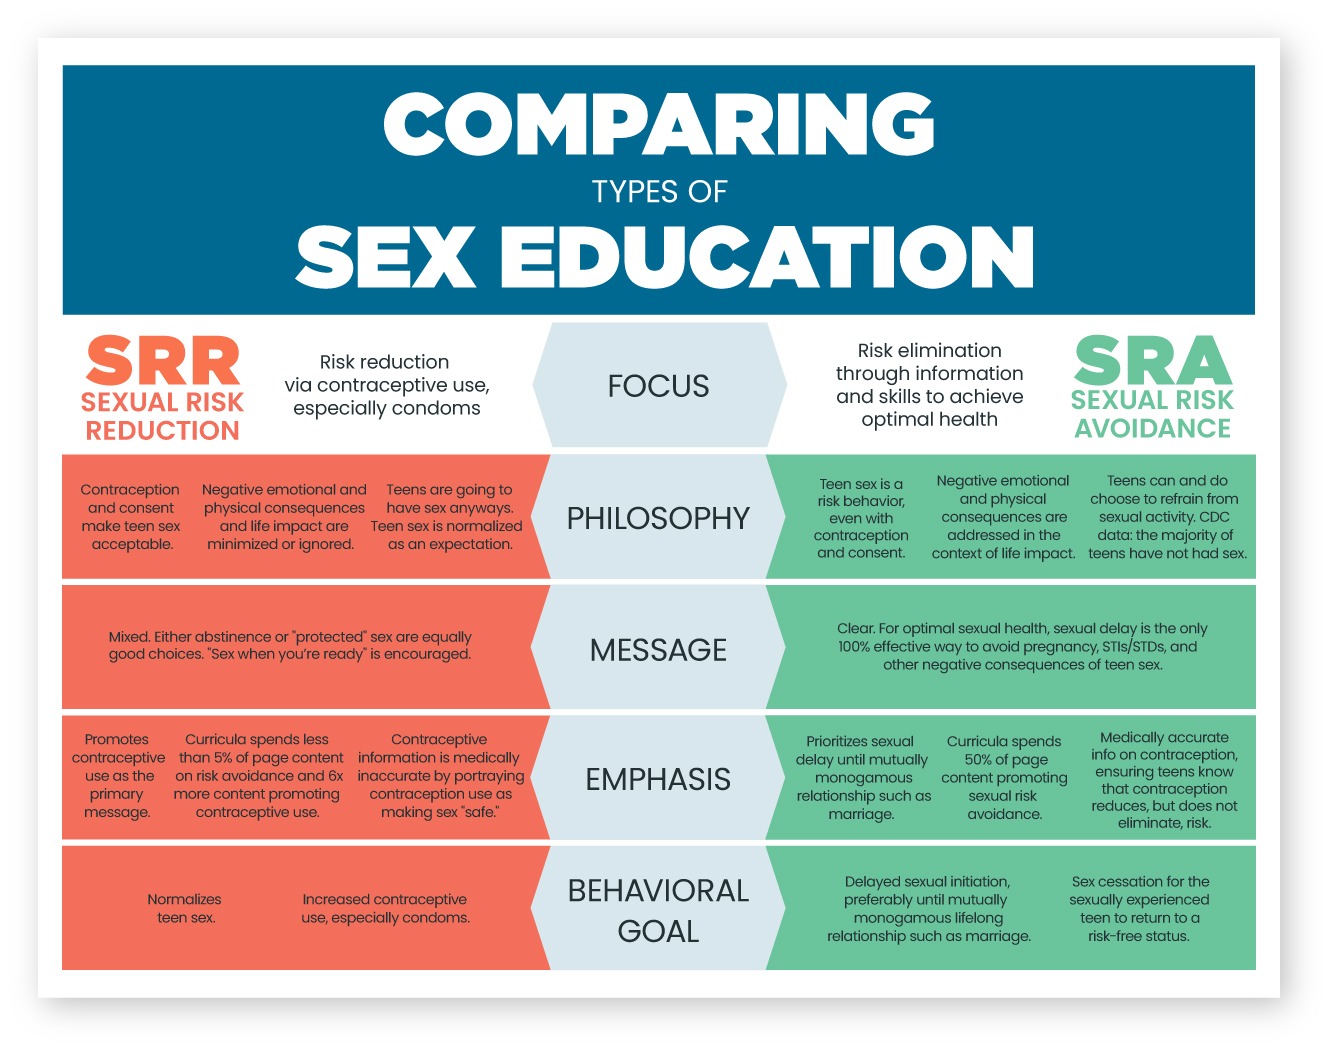 Comparing Types of Sex Education